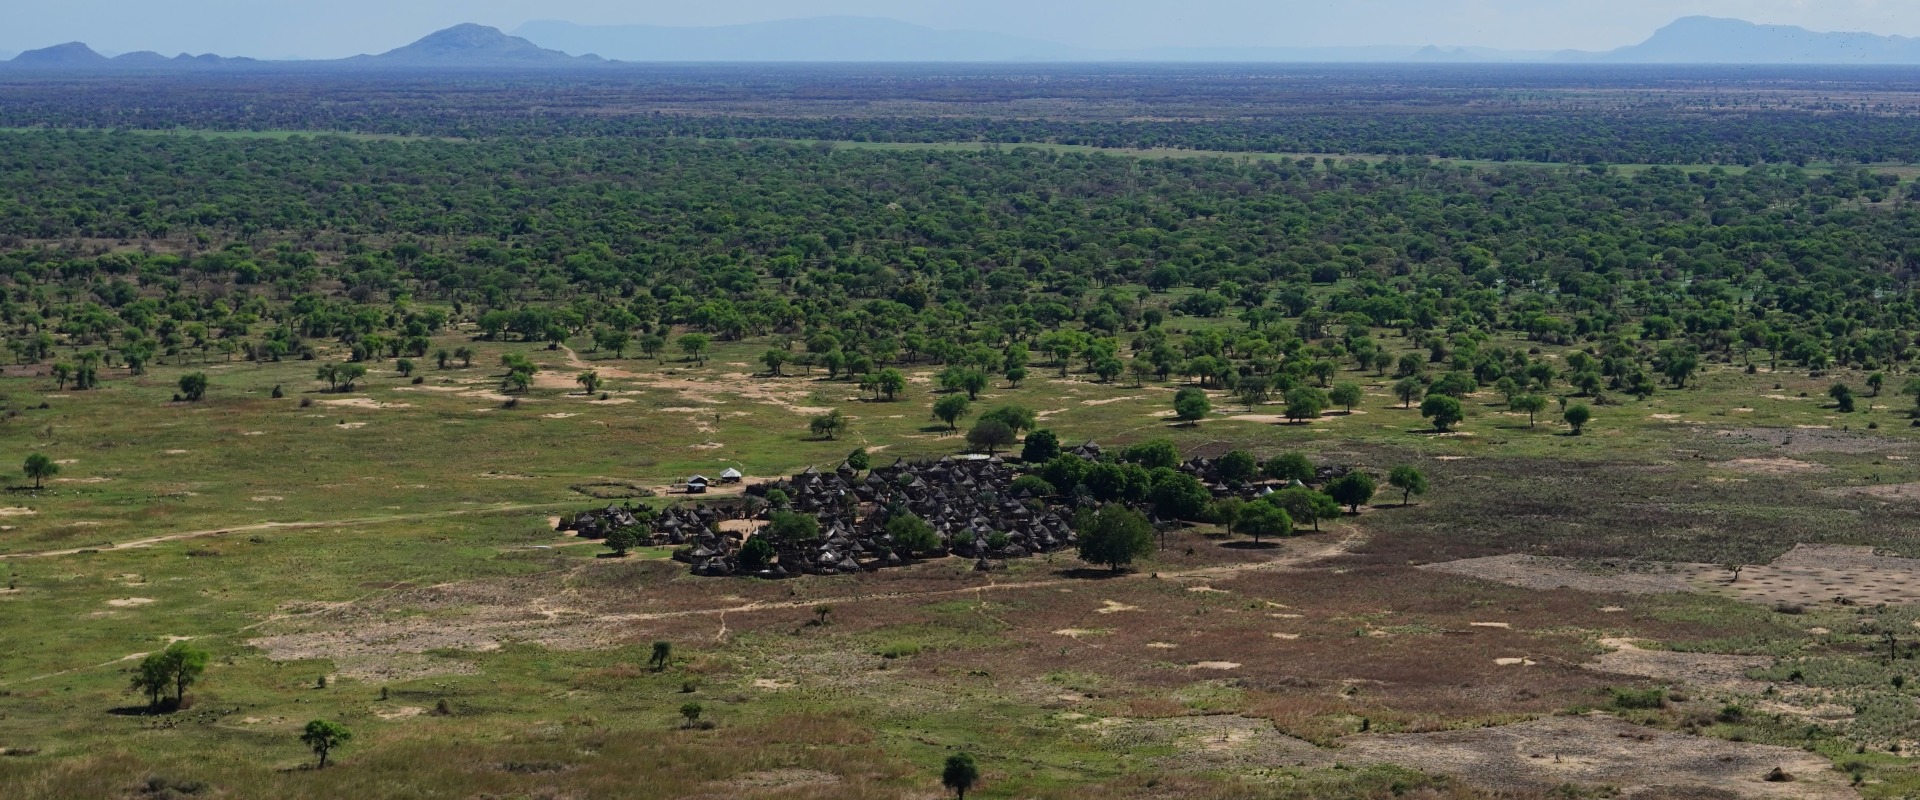 Project Landscape with village, courtesy of African Parks